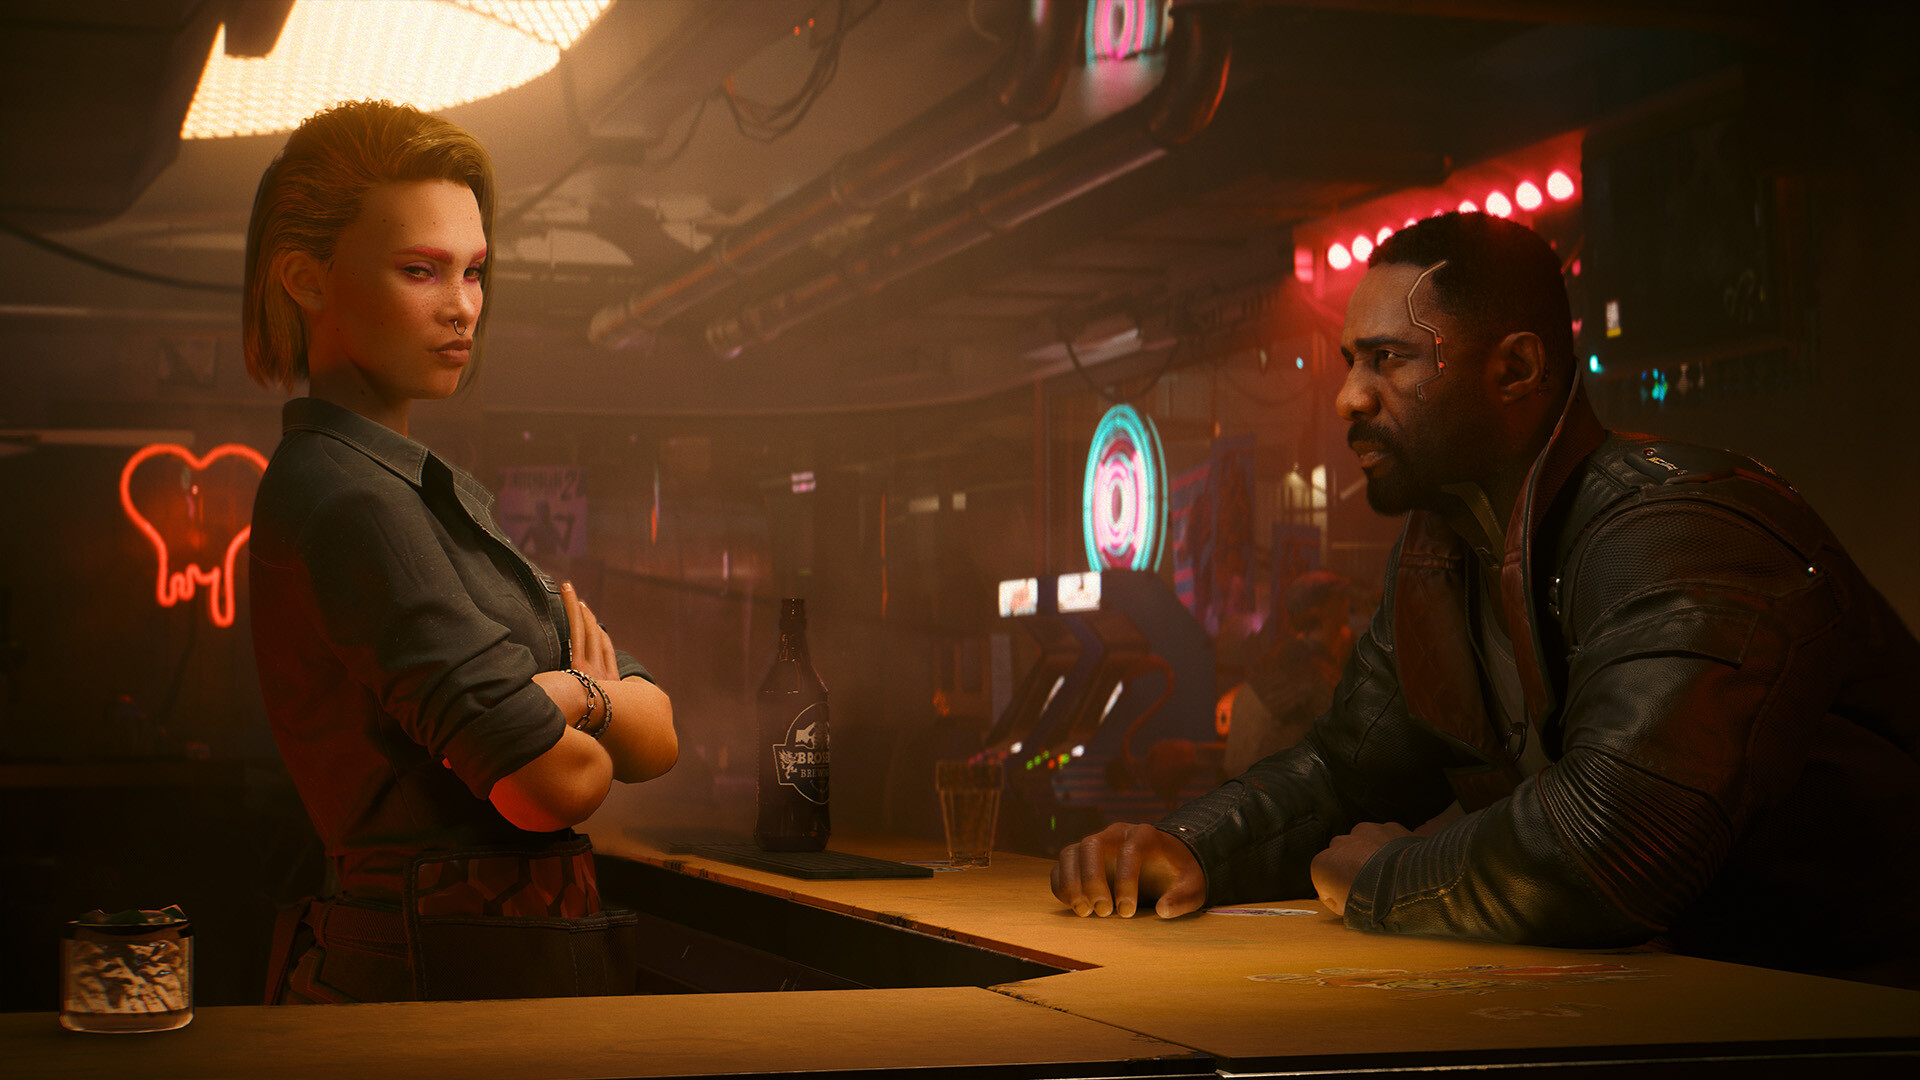 Marvel's Wolverine writer joins CD Projekt Red to help the studio develop the second game in the Cyberpunk 2077 universe